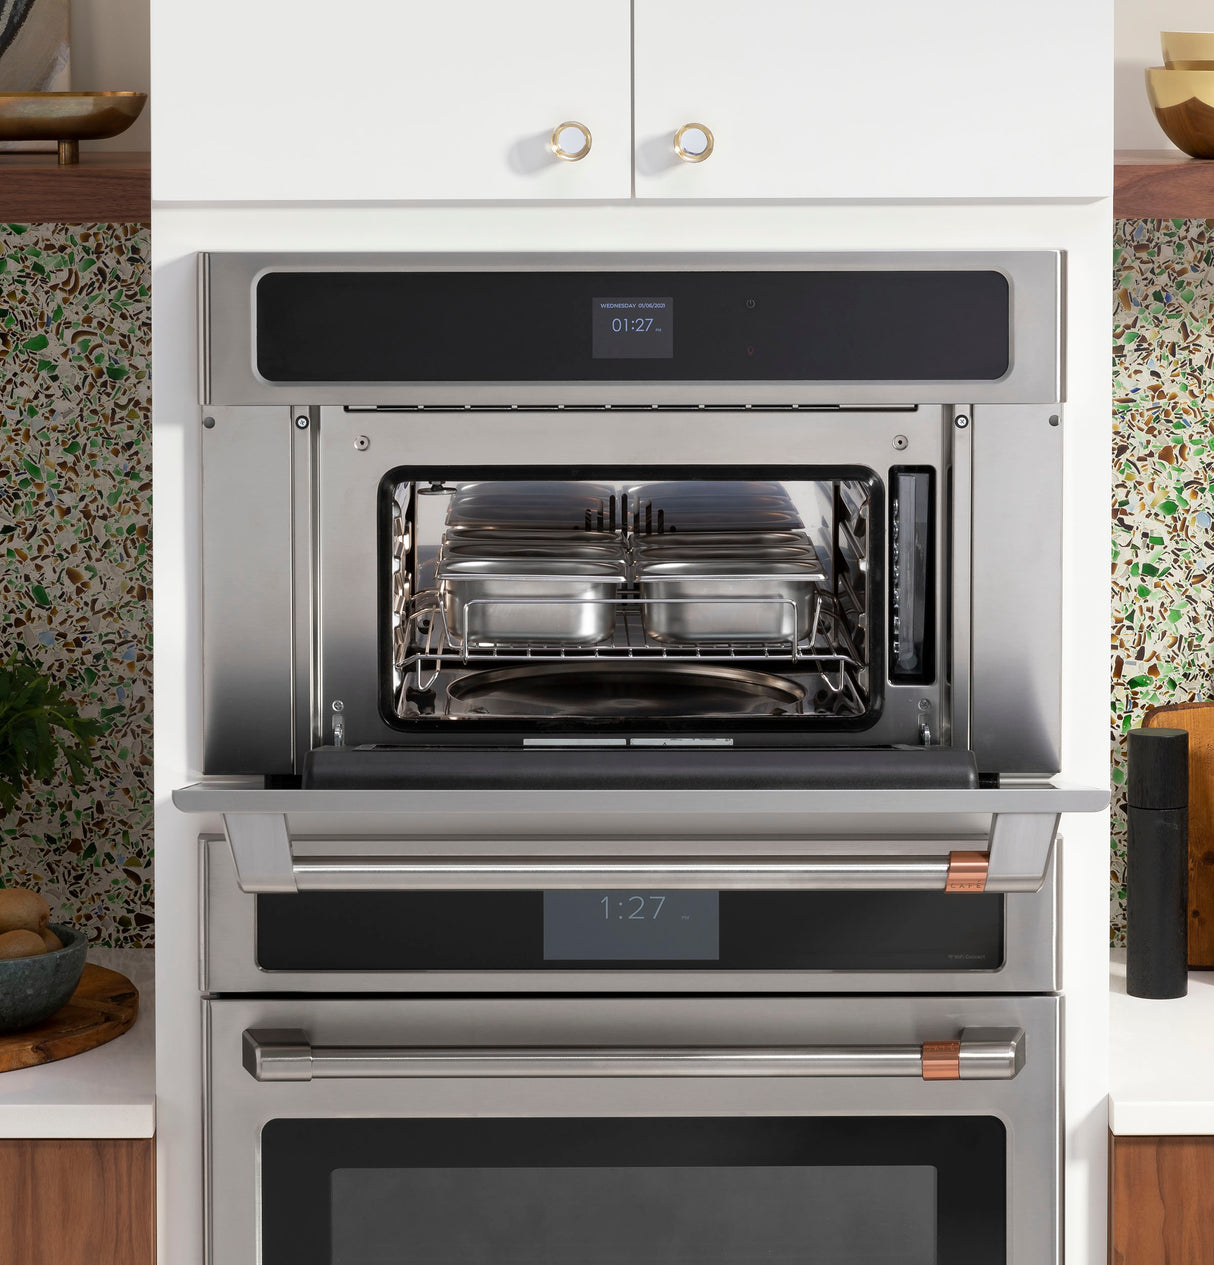 Caf(eback)(TM) 30" Pro Convection Steam Oven - (CMB903P2NS1)